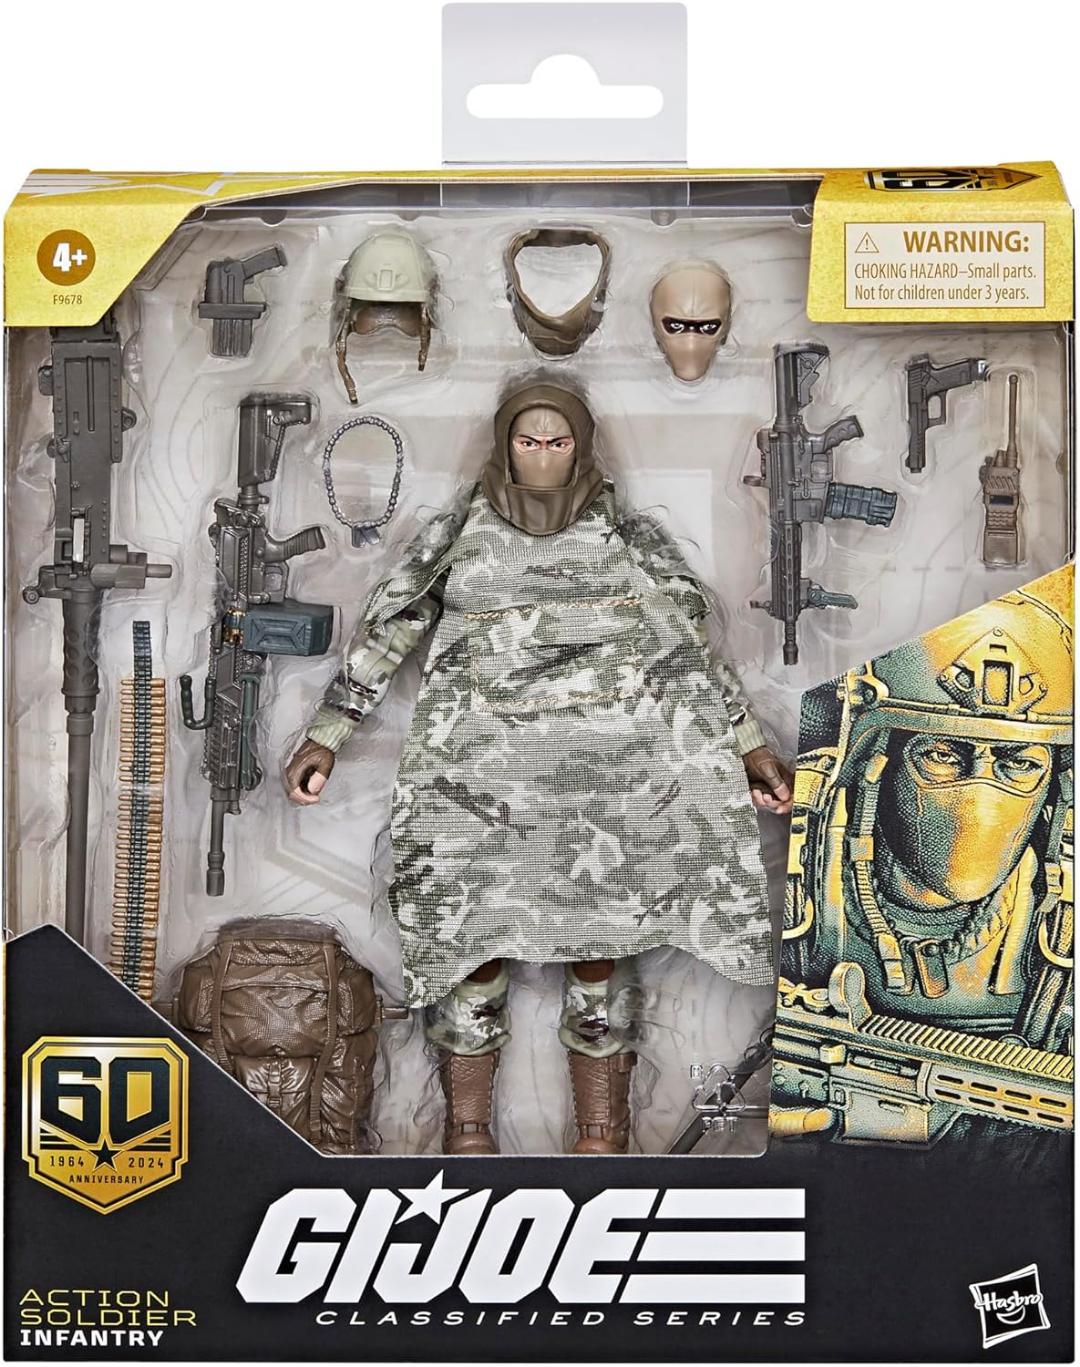 G.I. Joe Classified Series 60th Anniv Action Soldier Infantry 6-Inch Action Figure画像